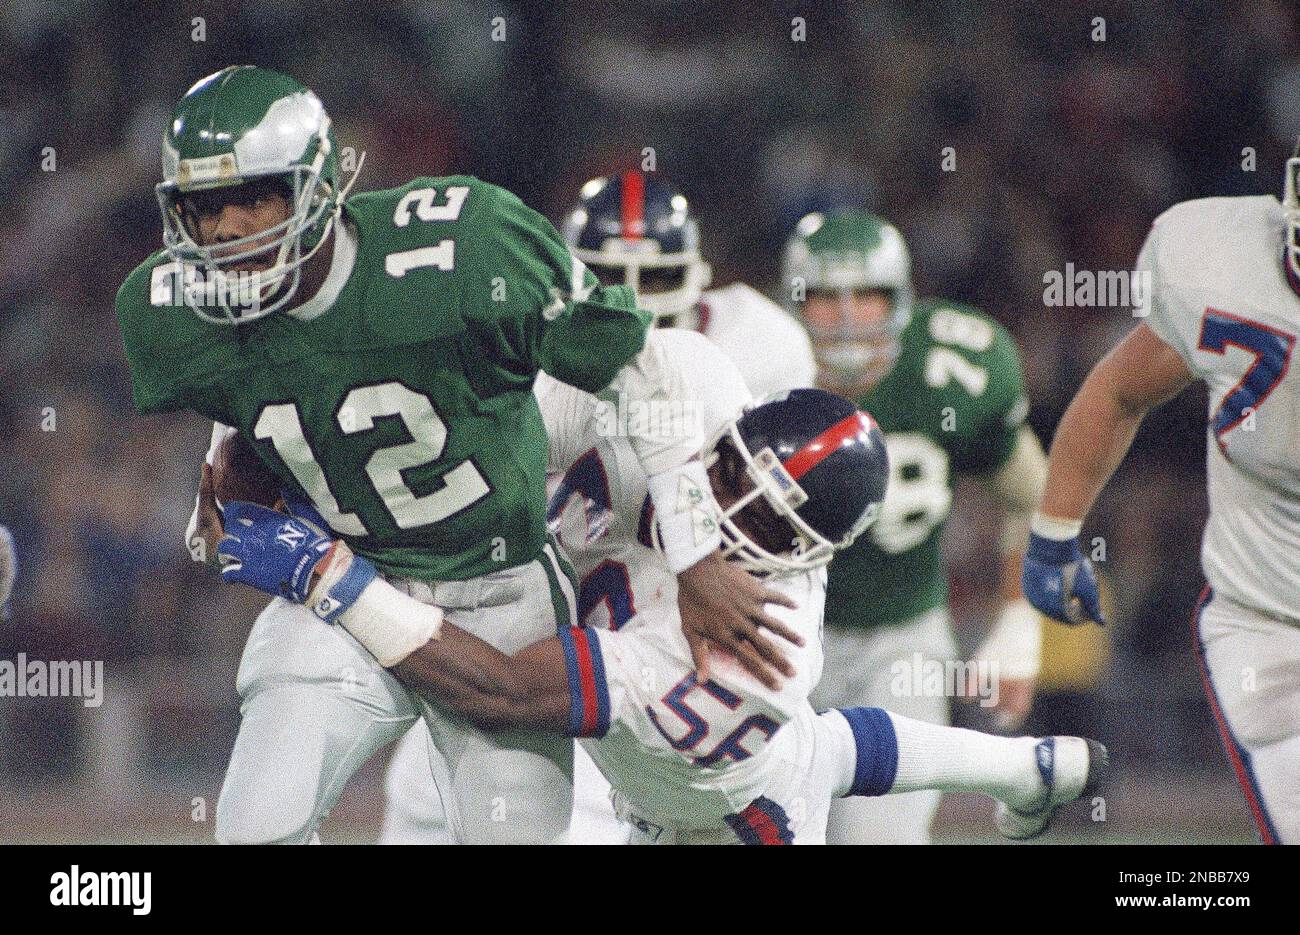 https://c8.alamy.com/comp/2NBB7X9/philadelphia-eagles-quarterback-randall-cunningham-is-tackled-by-new-york-giants-lawrence-taylor-as-he-ran-for-a-three-yard-gain-in-the-fourth-quarter-of-game-at-veterans-stadium-in-philadelphia-on-sunday-nov-15-1987-taylor-was-injured-on-the-play-and-helped-off-the-field-the-giants-won-the-game-20-17-ap-photopeter-morgan-2NBB7X9.jpg